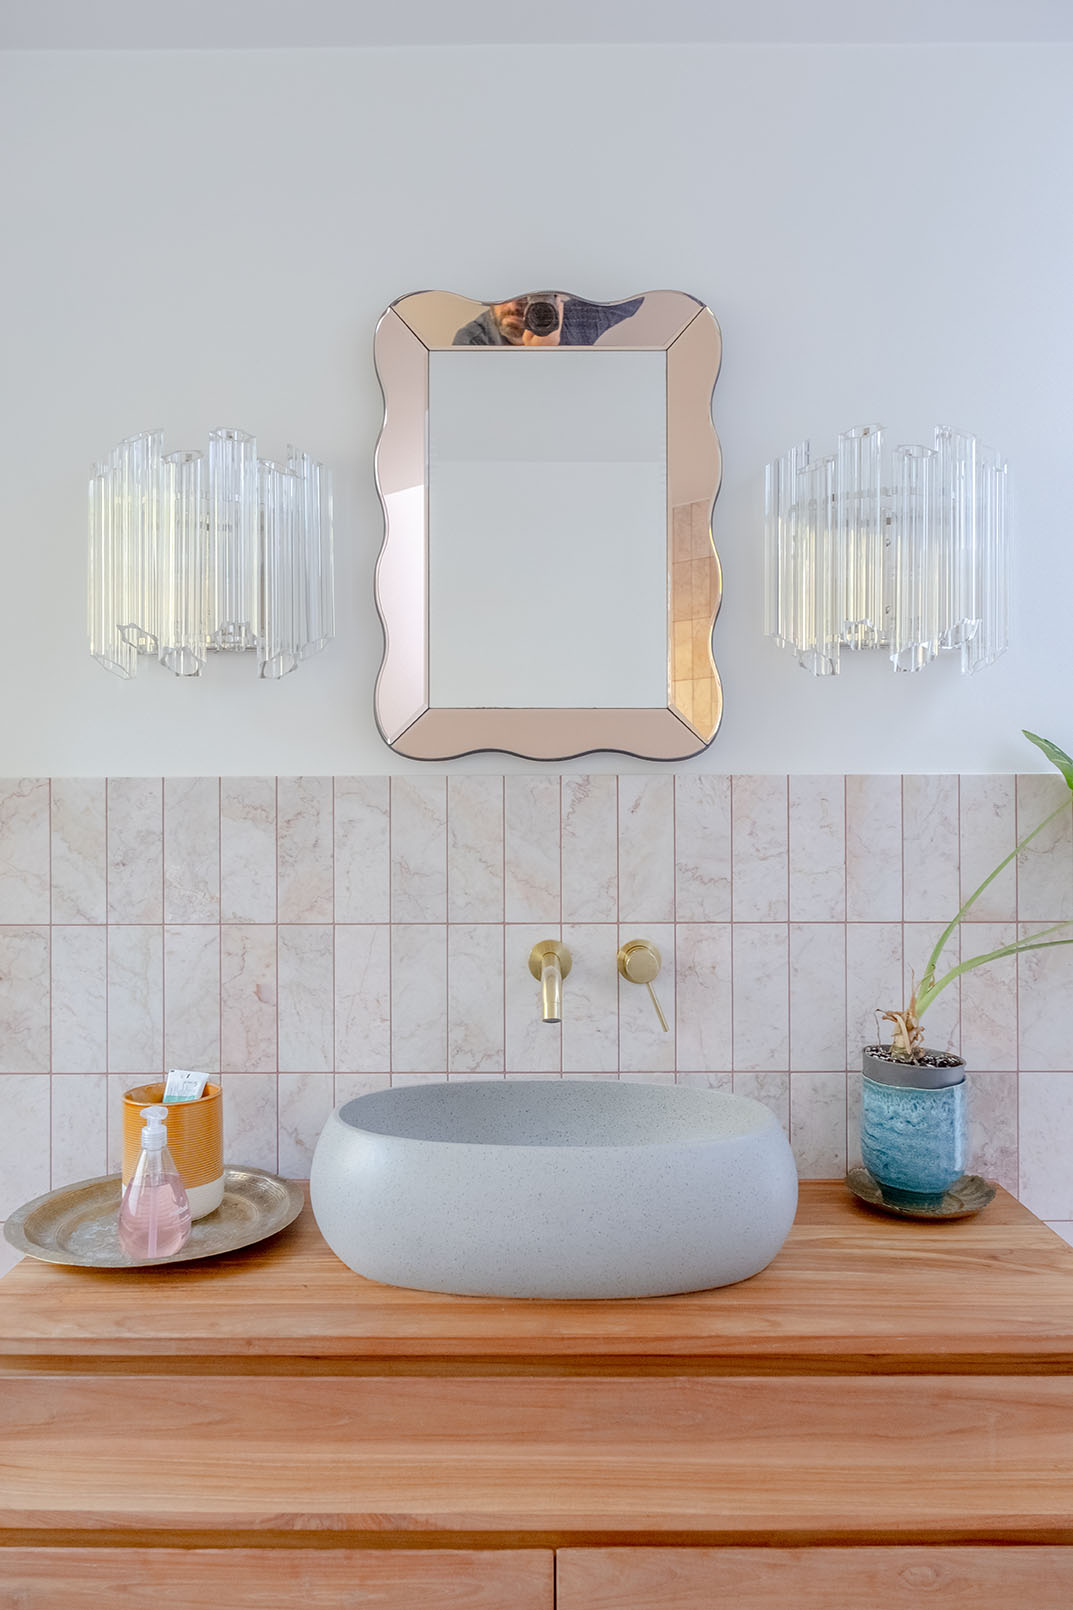 Bathroom detail image for property photography with a round grey sink and a shiny framed mirror